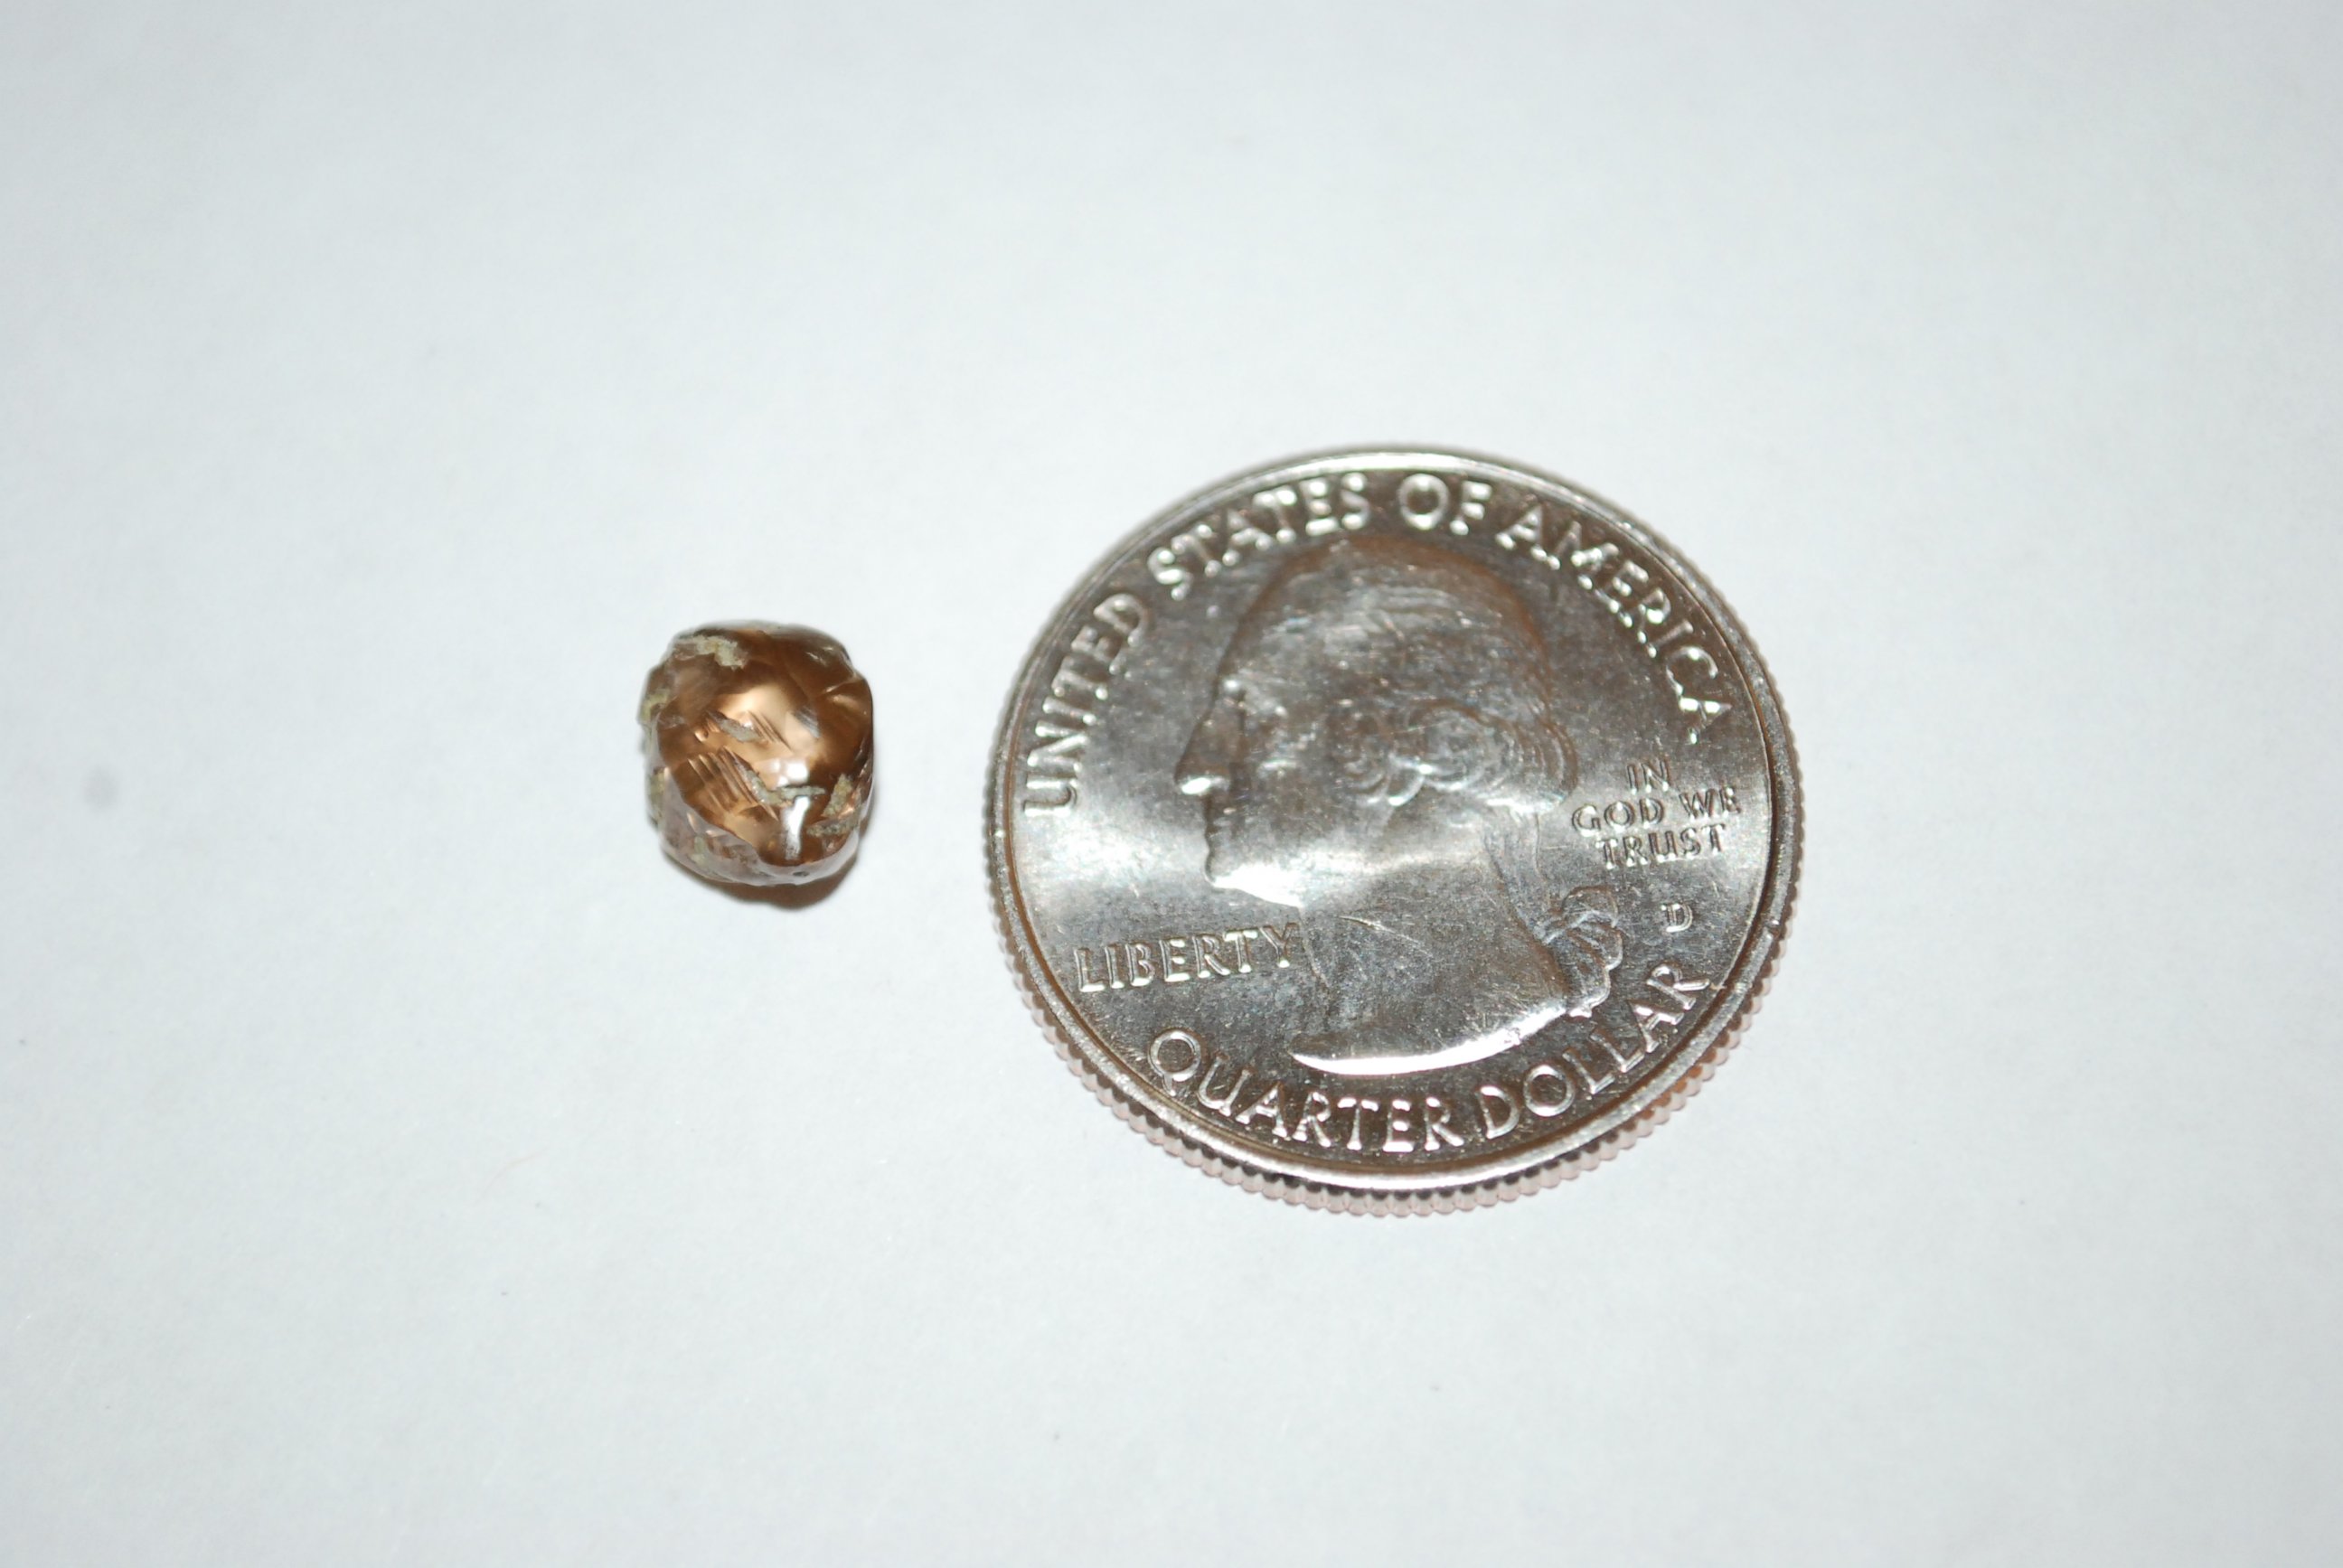 PHOTO: A 2.78 carat champagne brown diamond found in Crater of Diamonds State Park in Arkansas on May 13, 2017.